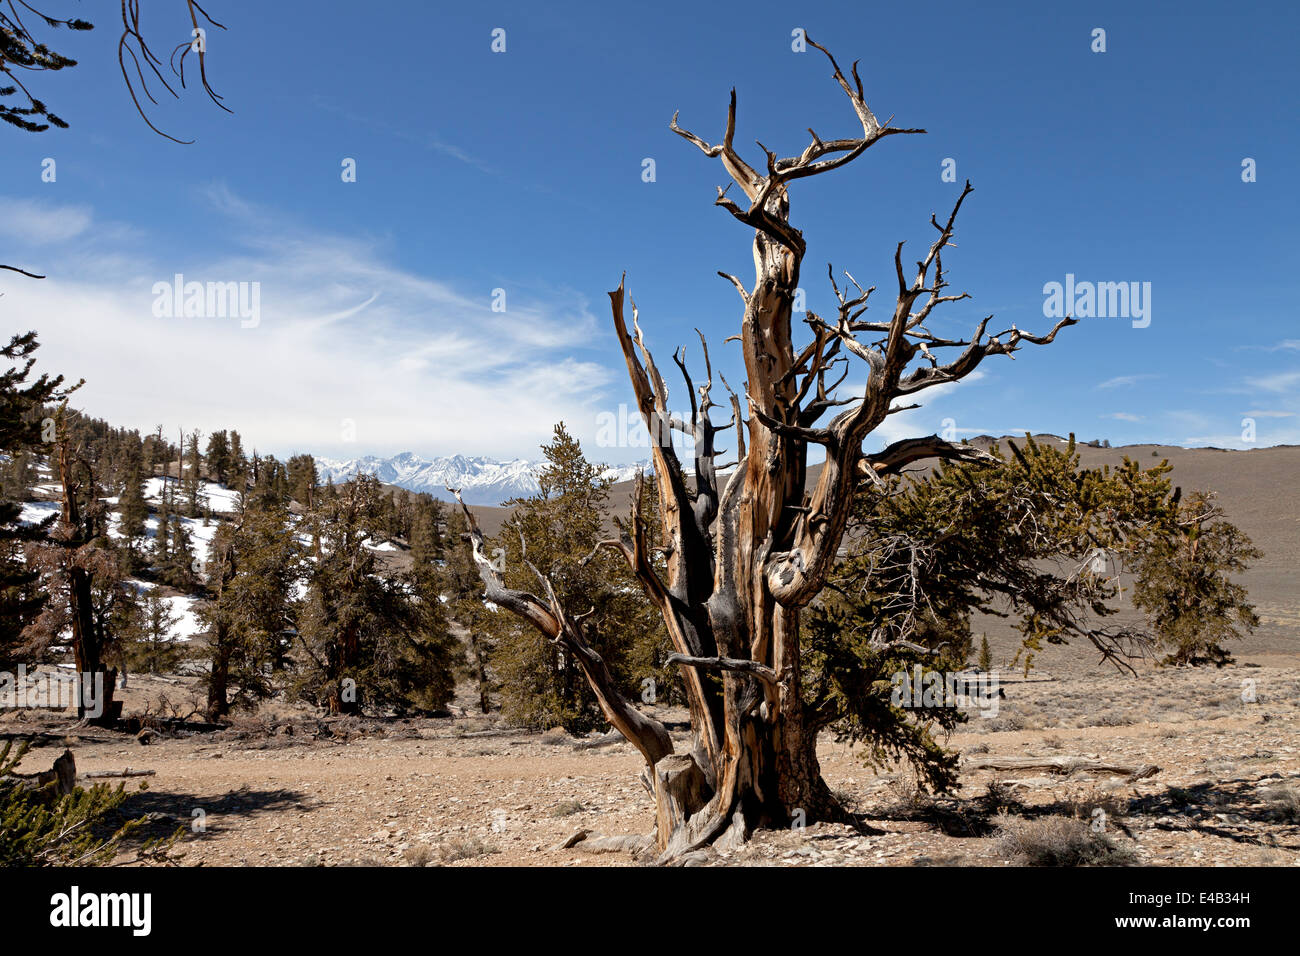 Bristlecone Pine Tree in the Ancient Bristlecone Pine Forest in Eastern California's White Mountains. Stock Photo